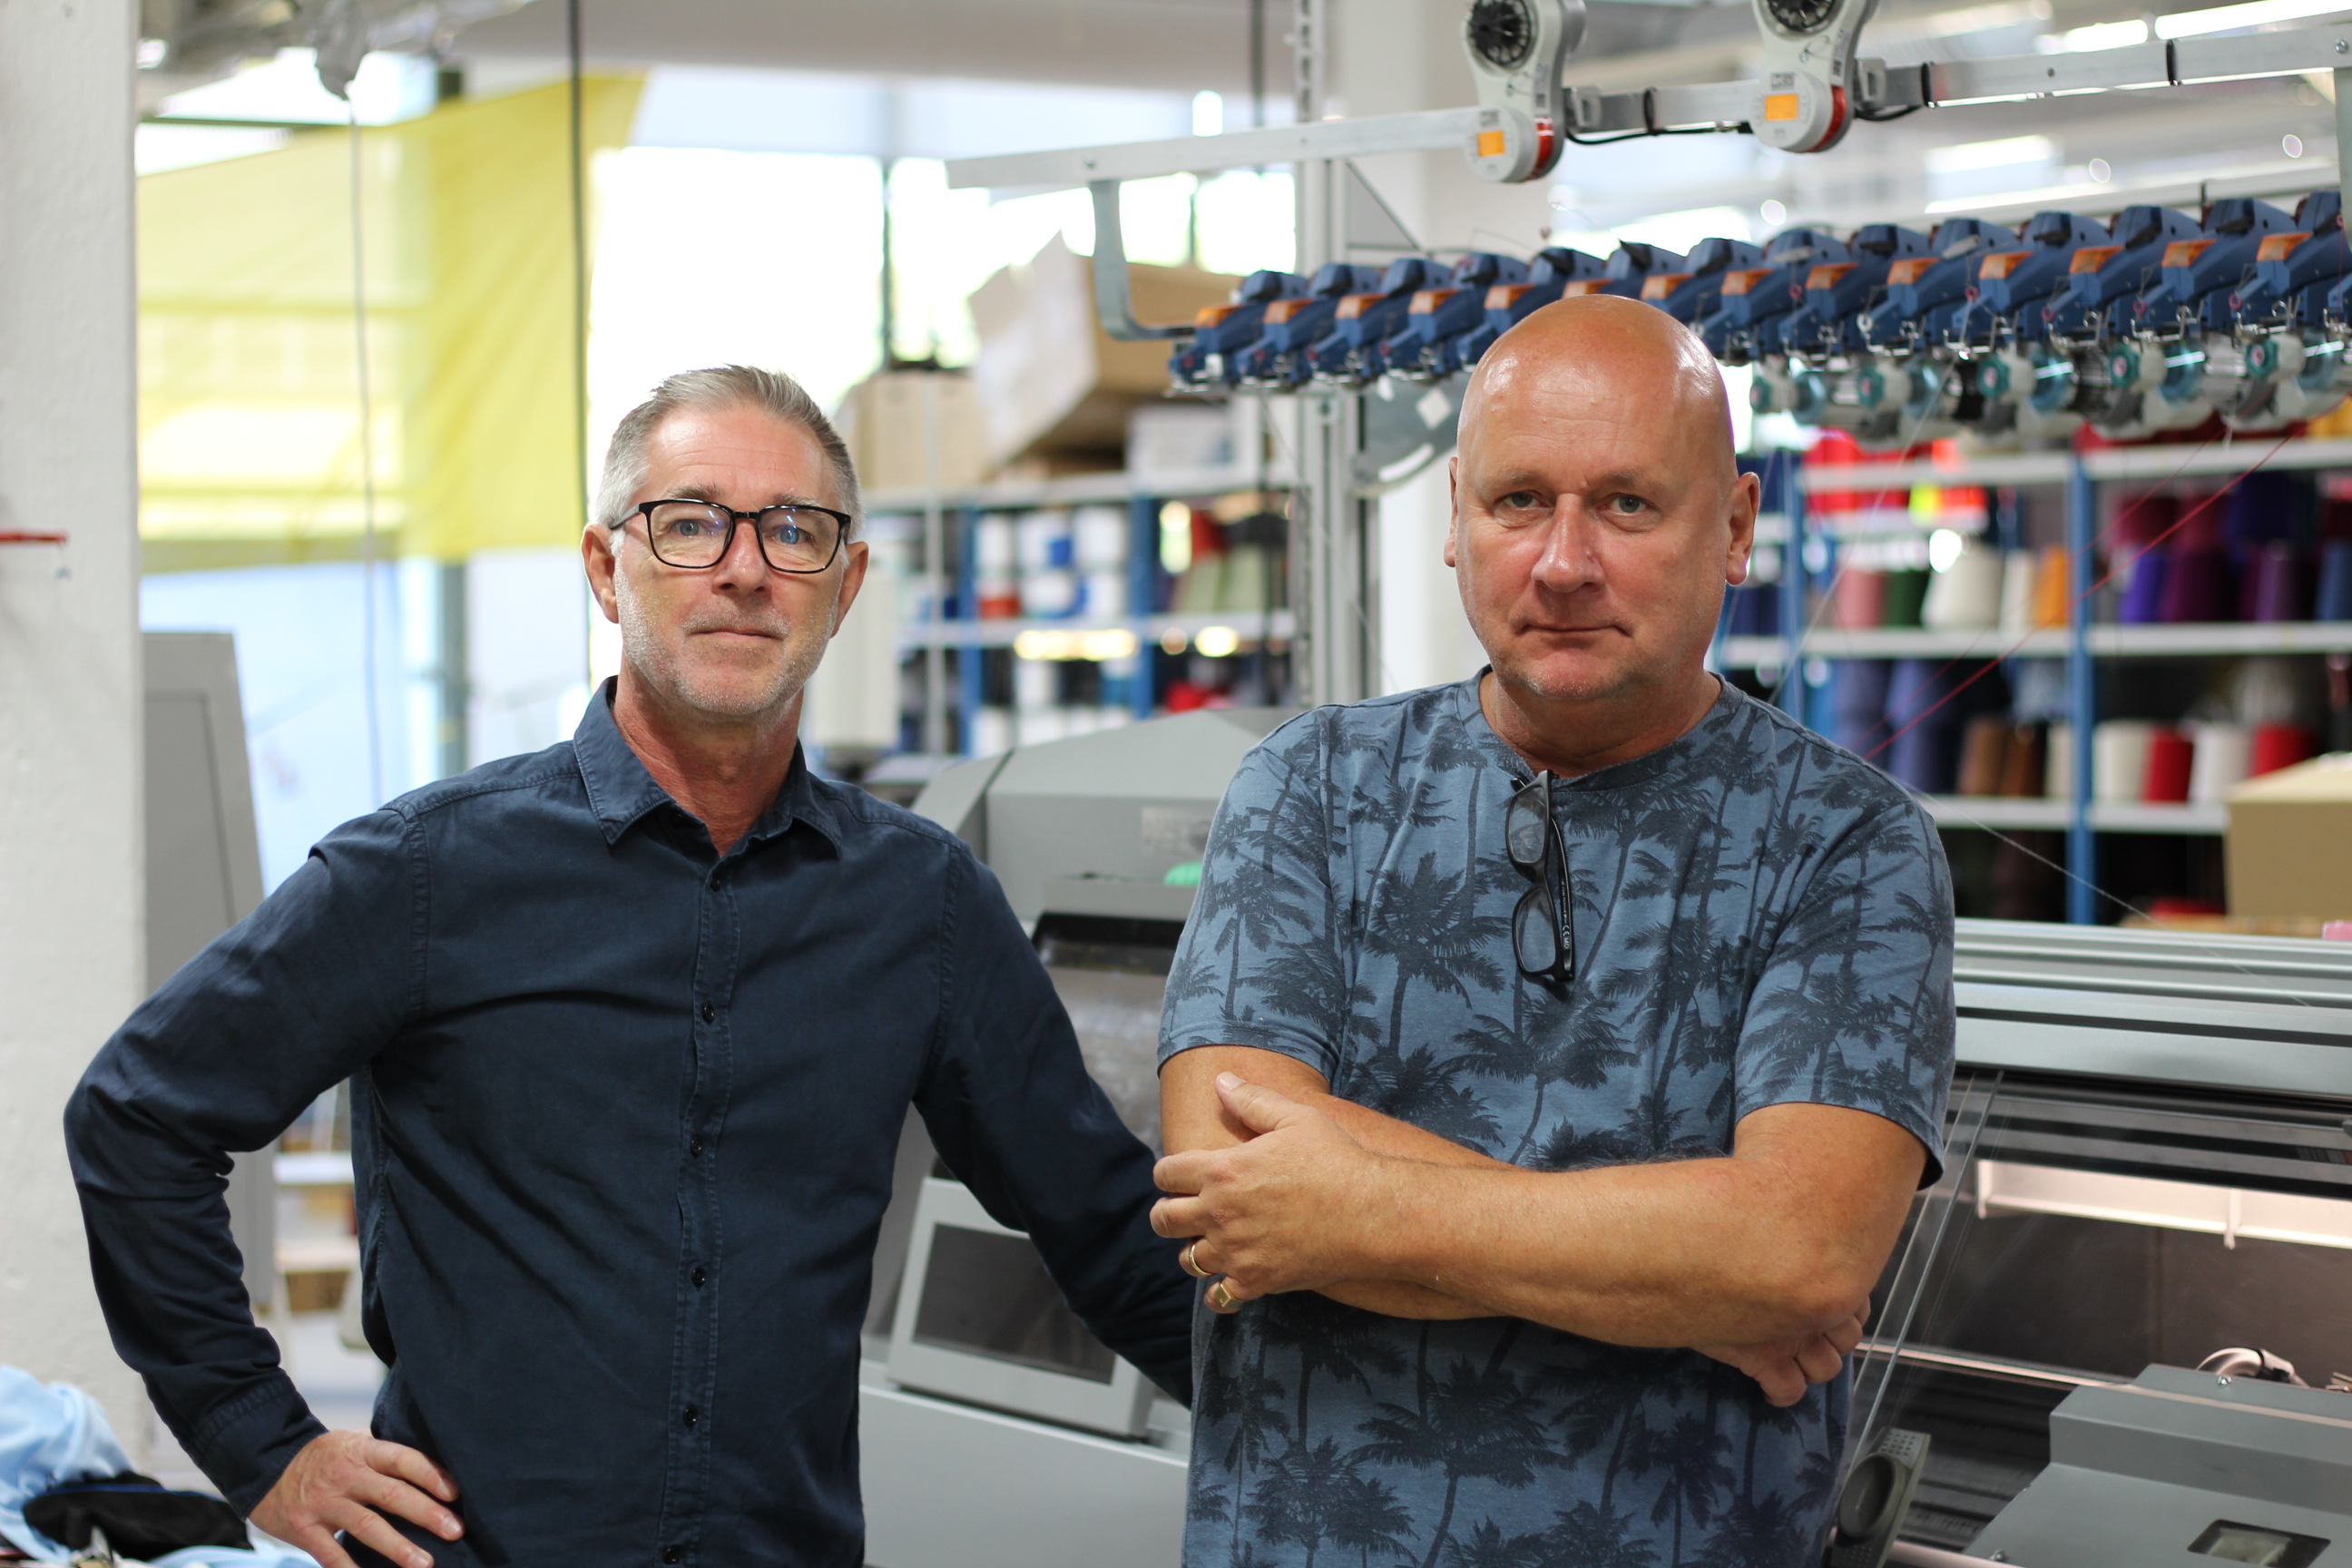 Flat knitting experts Kristian Roedby (left) and Lars Brandin with the Stoll ADF 530KI knitting machine. © Swedish School of Textiles